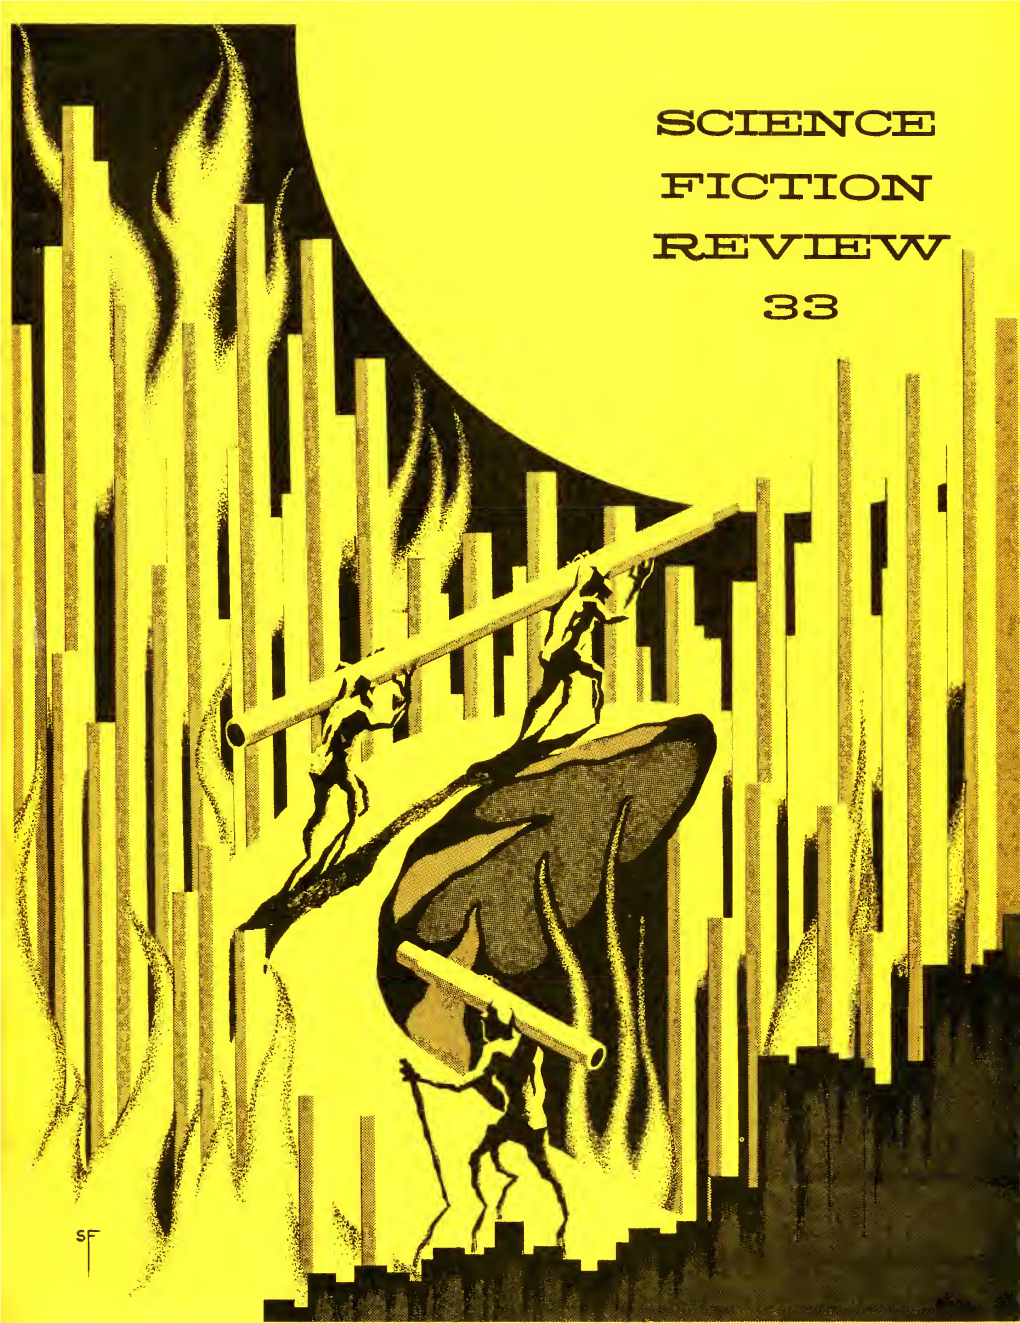 Science Fiction Review 33